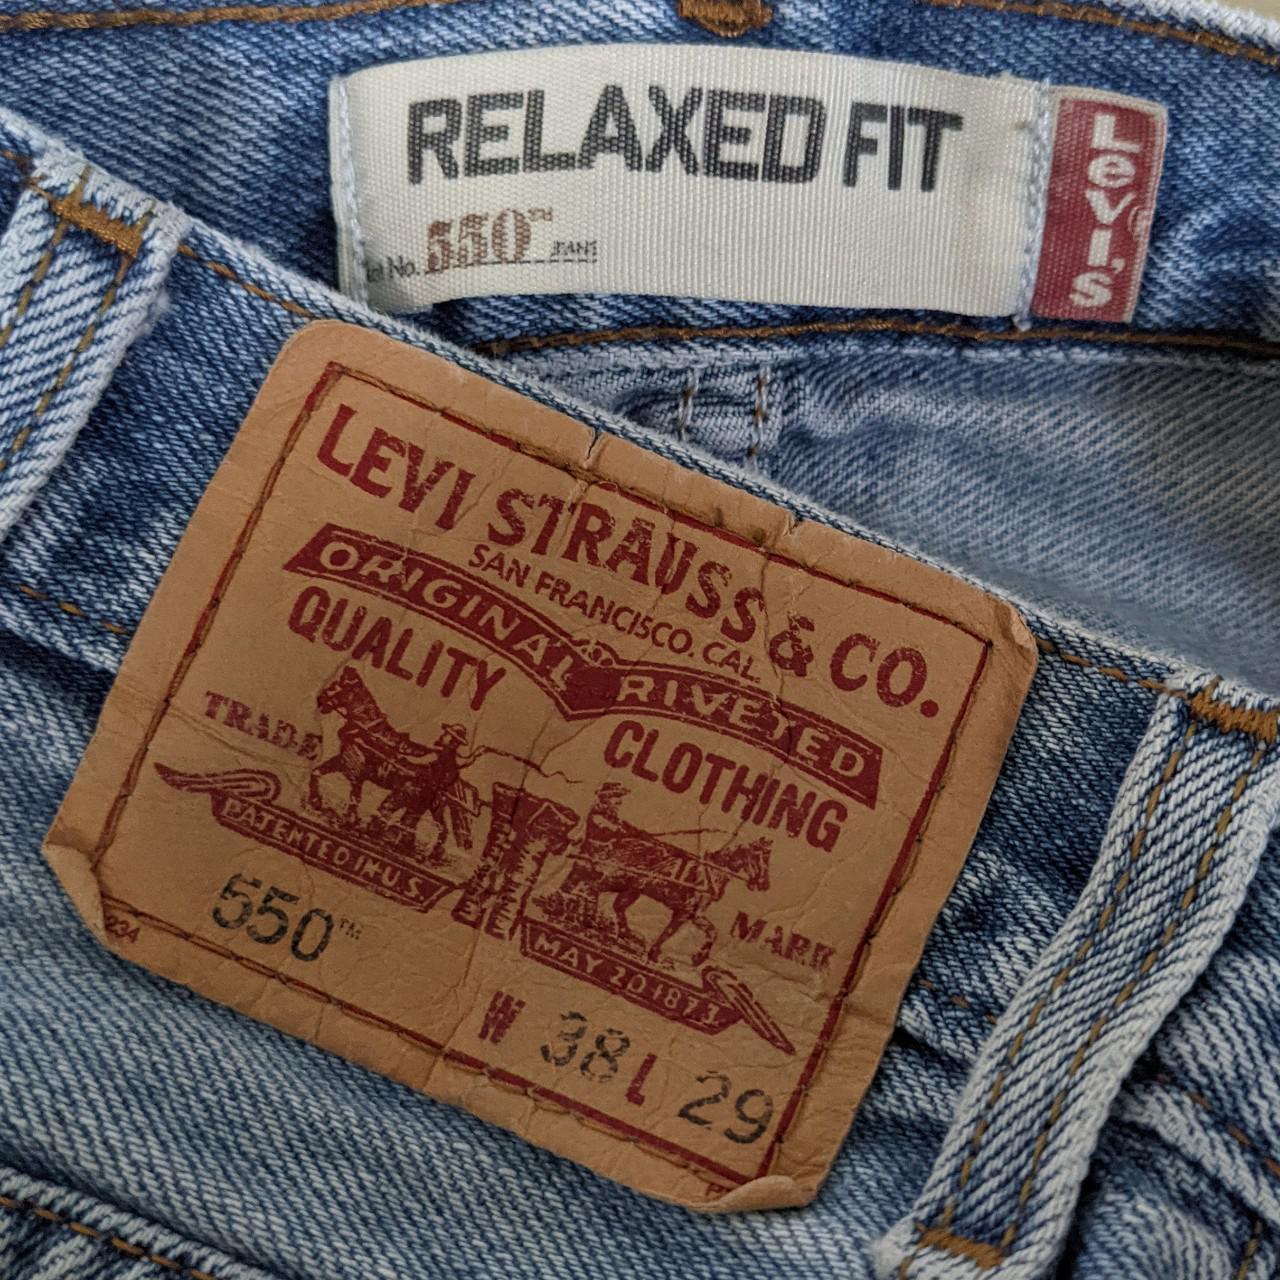 Product Image 4 - Vintage Levi's 550 jeans in